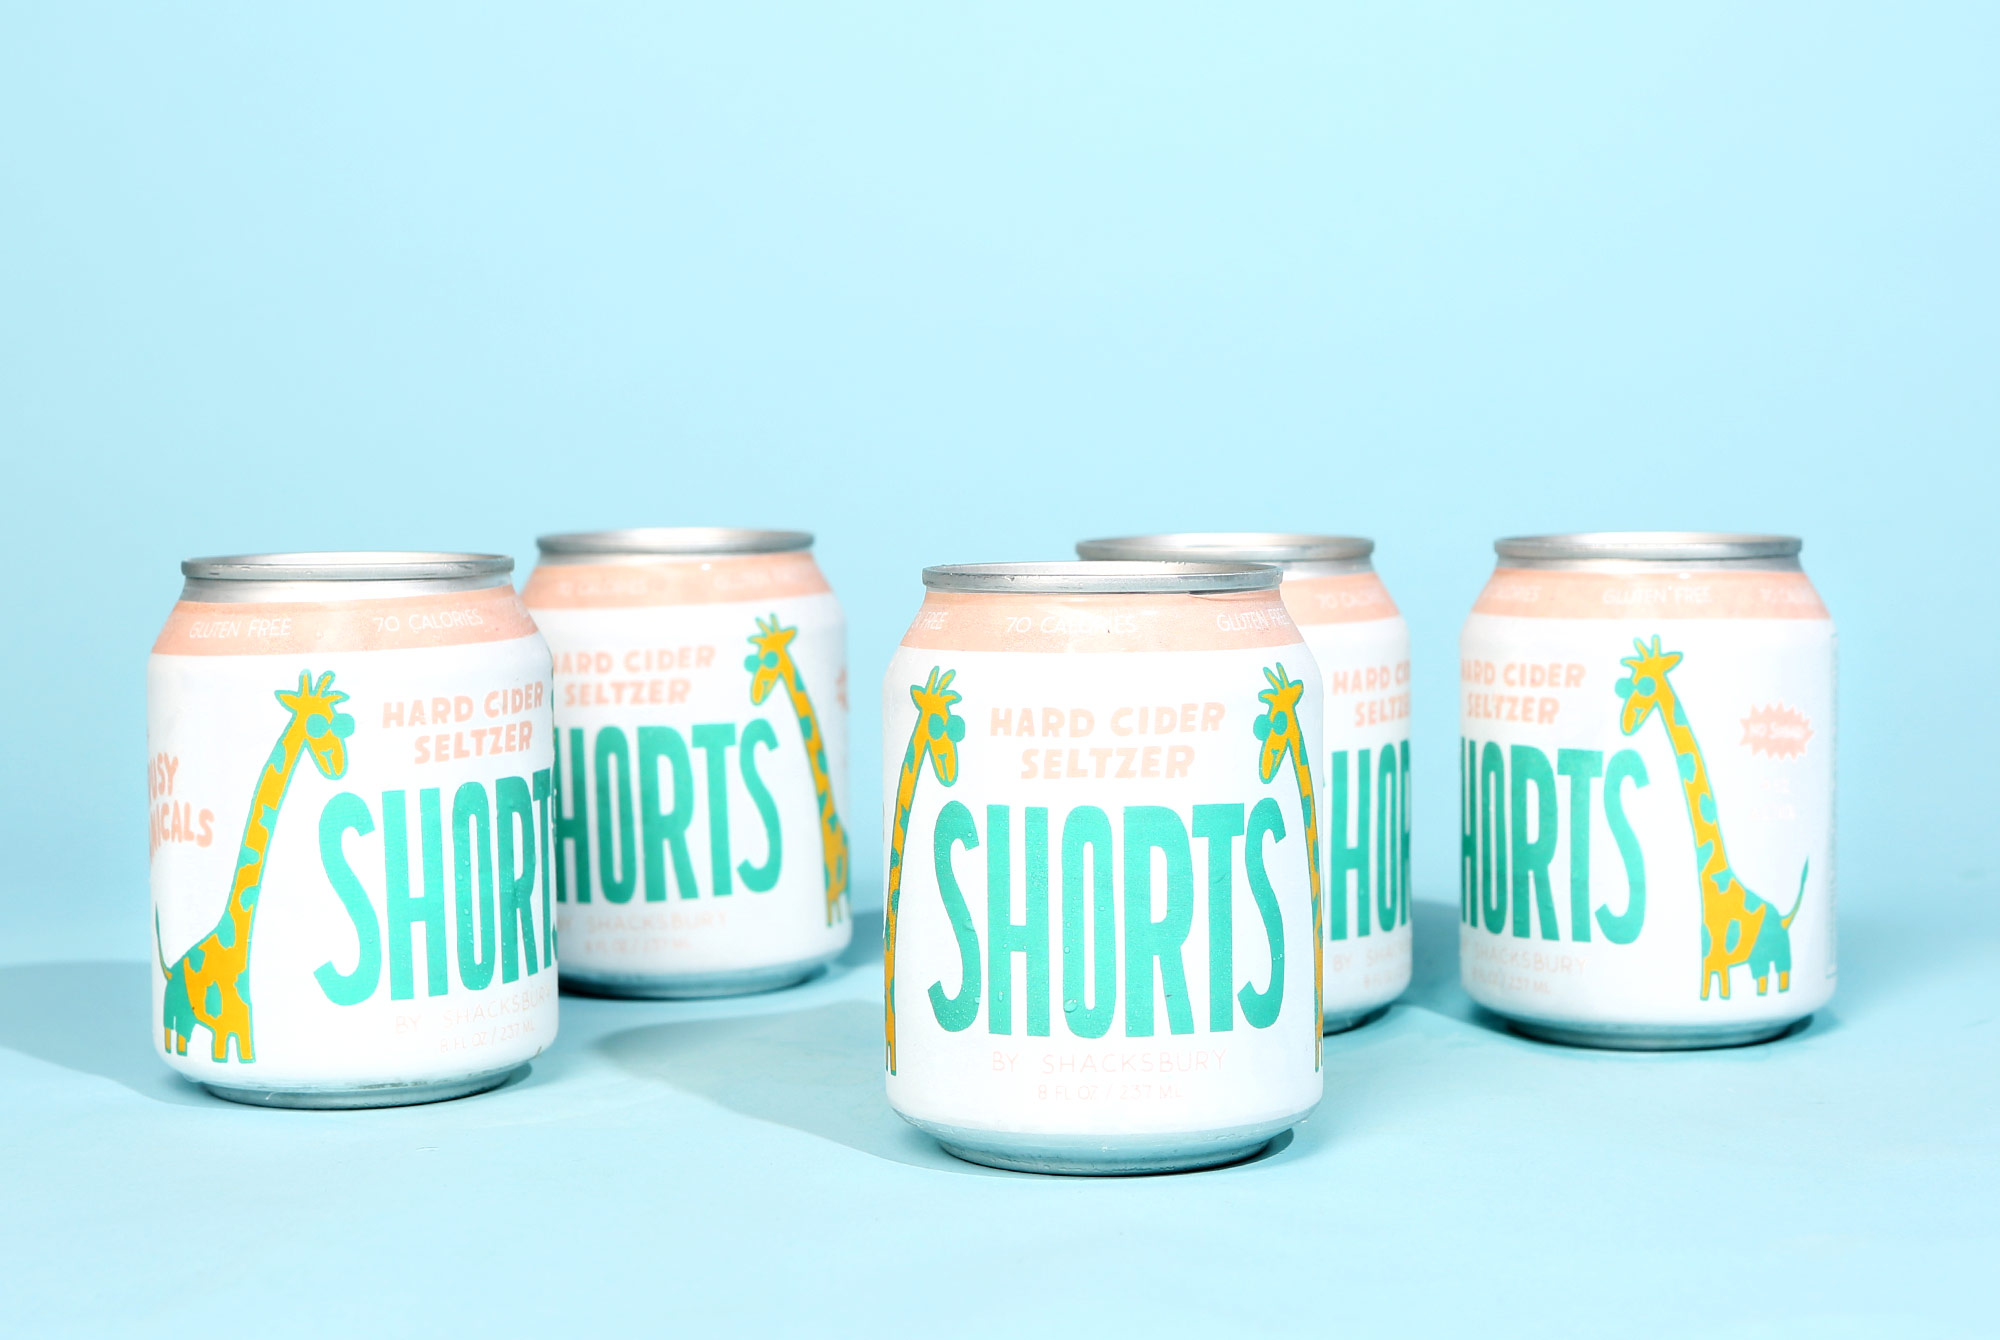 All We Want to Drink This Summer is Shacksbury SHORTS!